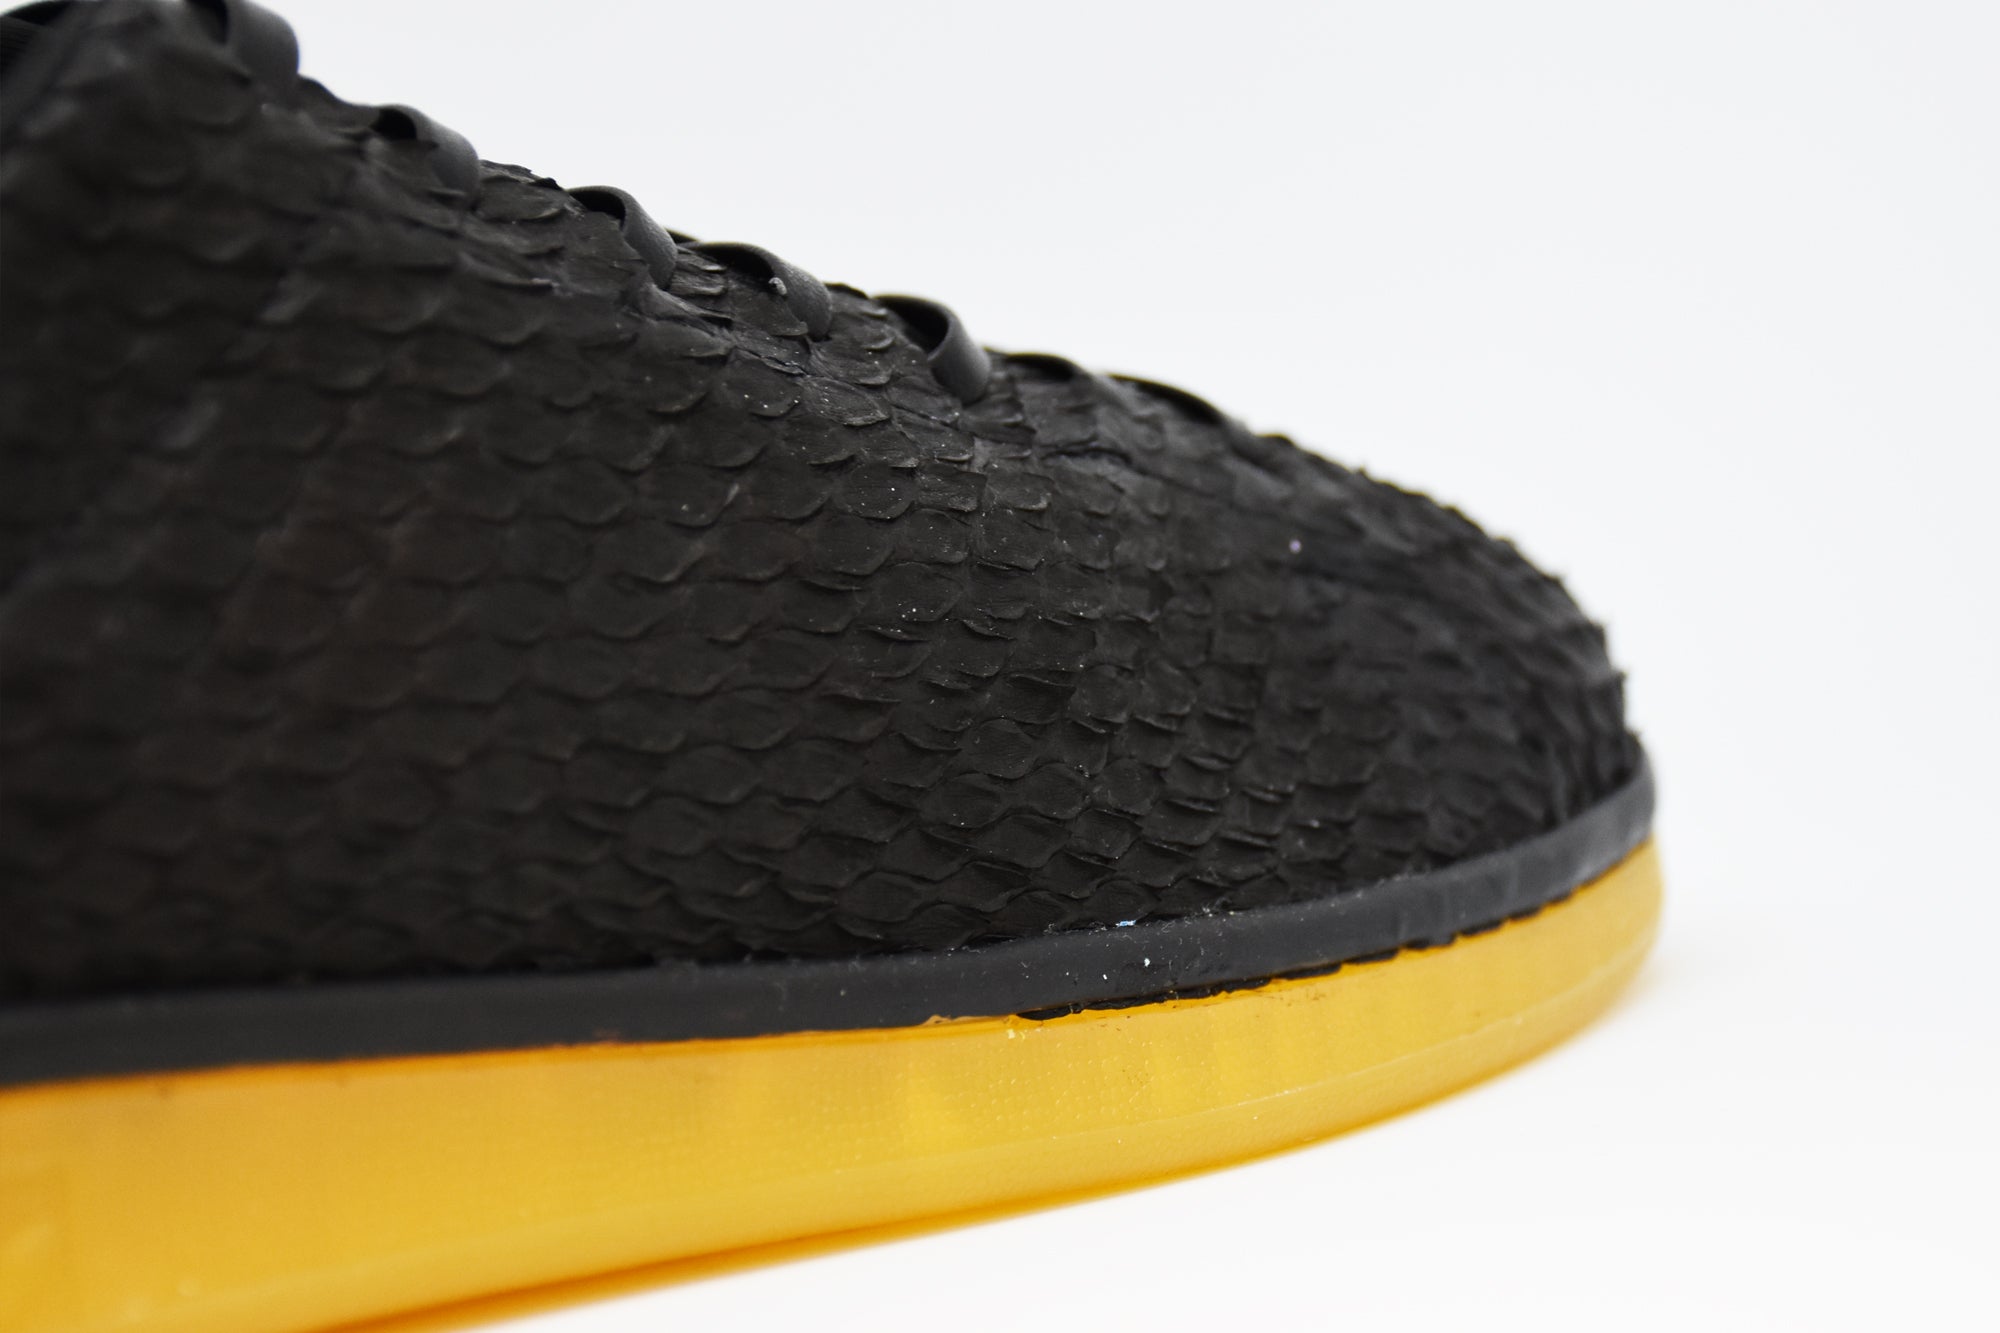 Stan Smith black python custom sneaker with an icy sole.